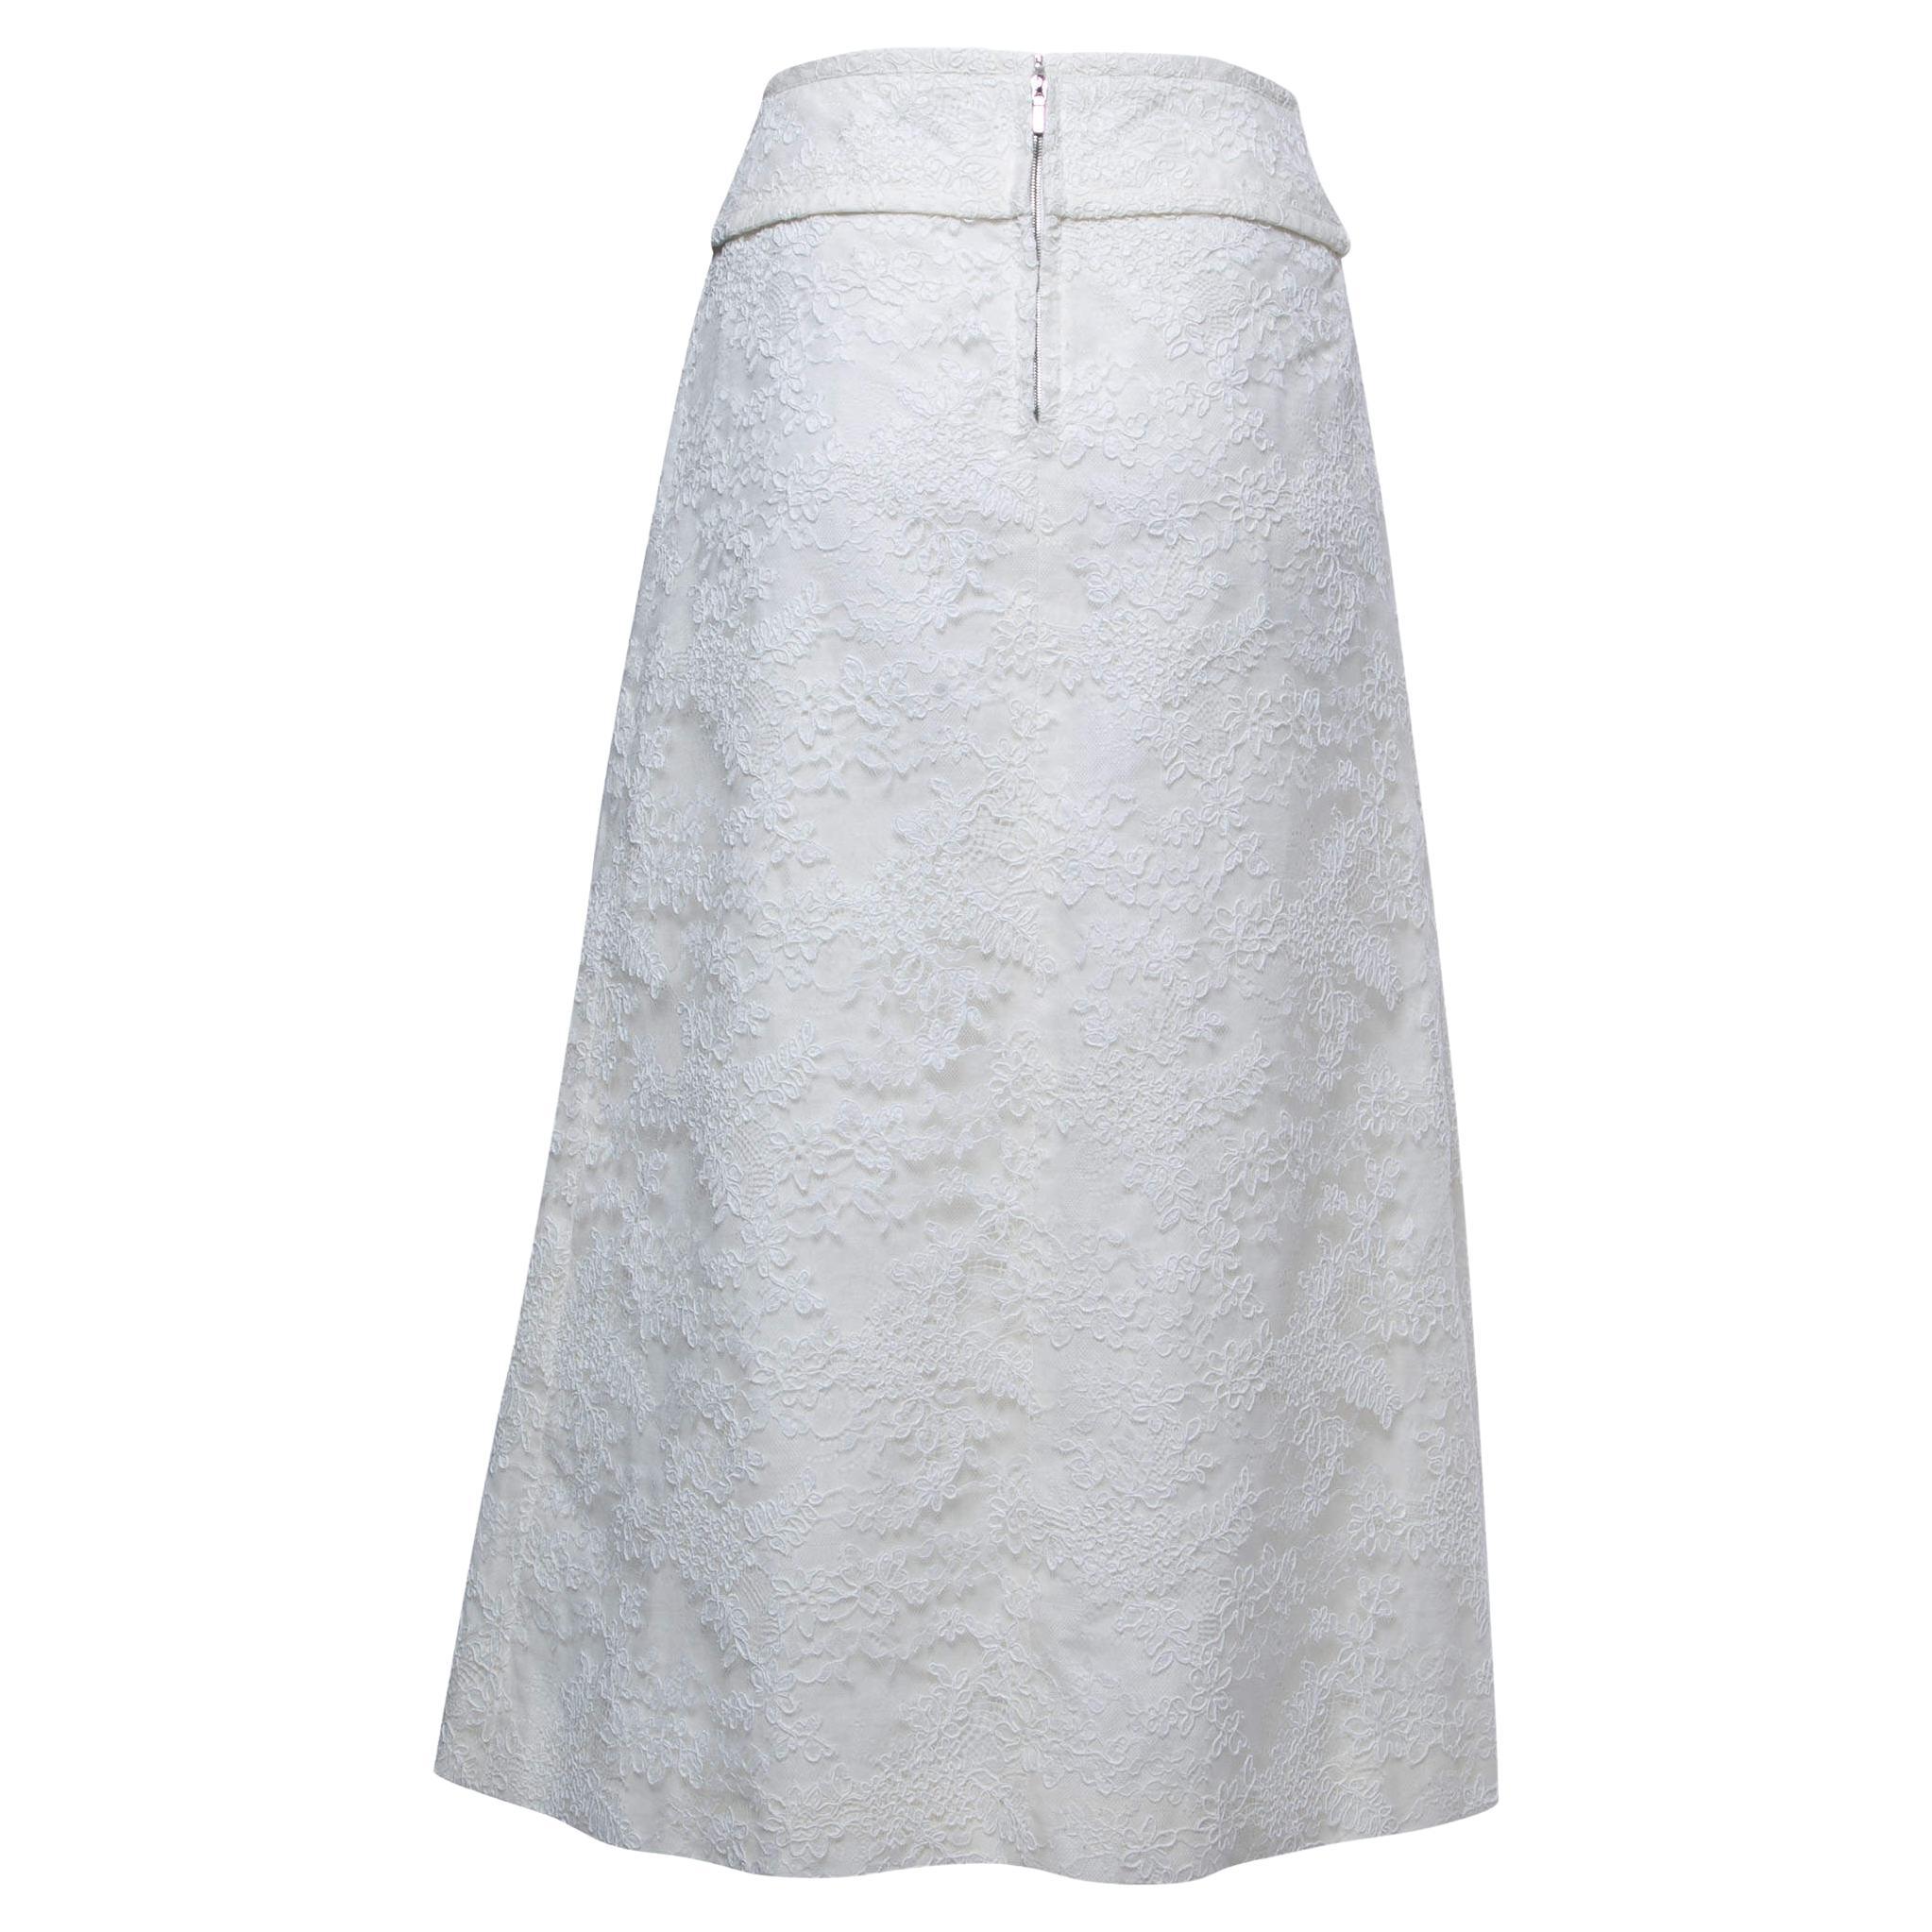 The Chanel skirt is an exquisite fashion piece featuring a blend of soft linen and delicate lace. This knee-length skirt boasts a timeless design with intricate lace detailing, adding a touch of elegance and femininity to any ensemble.

